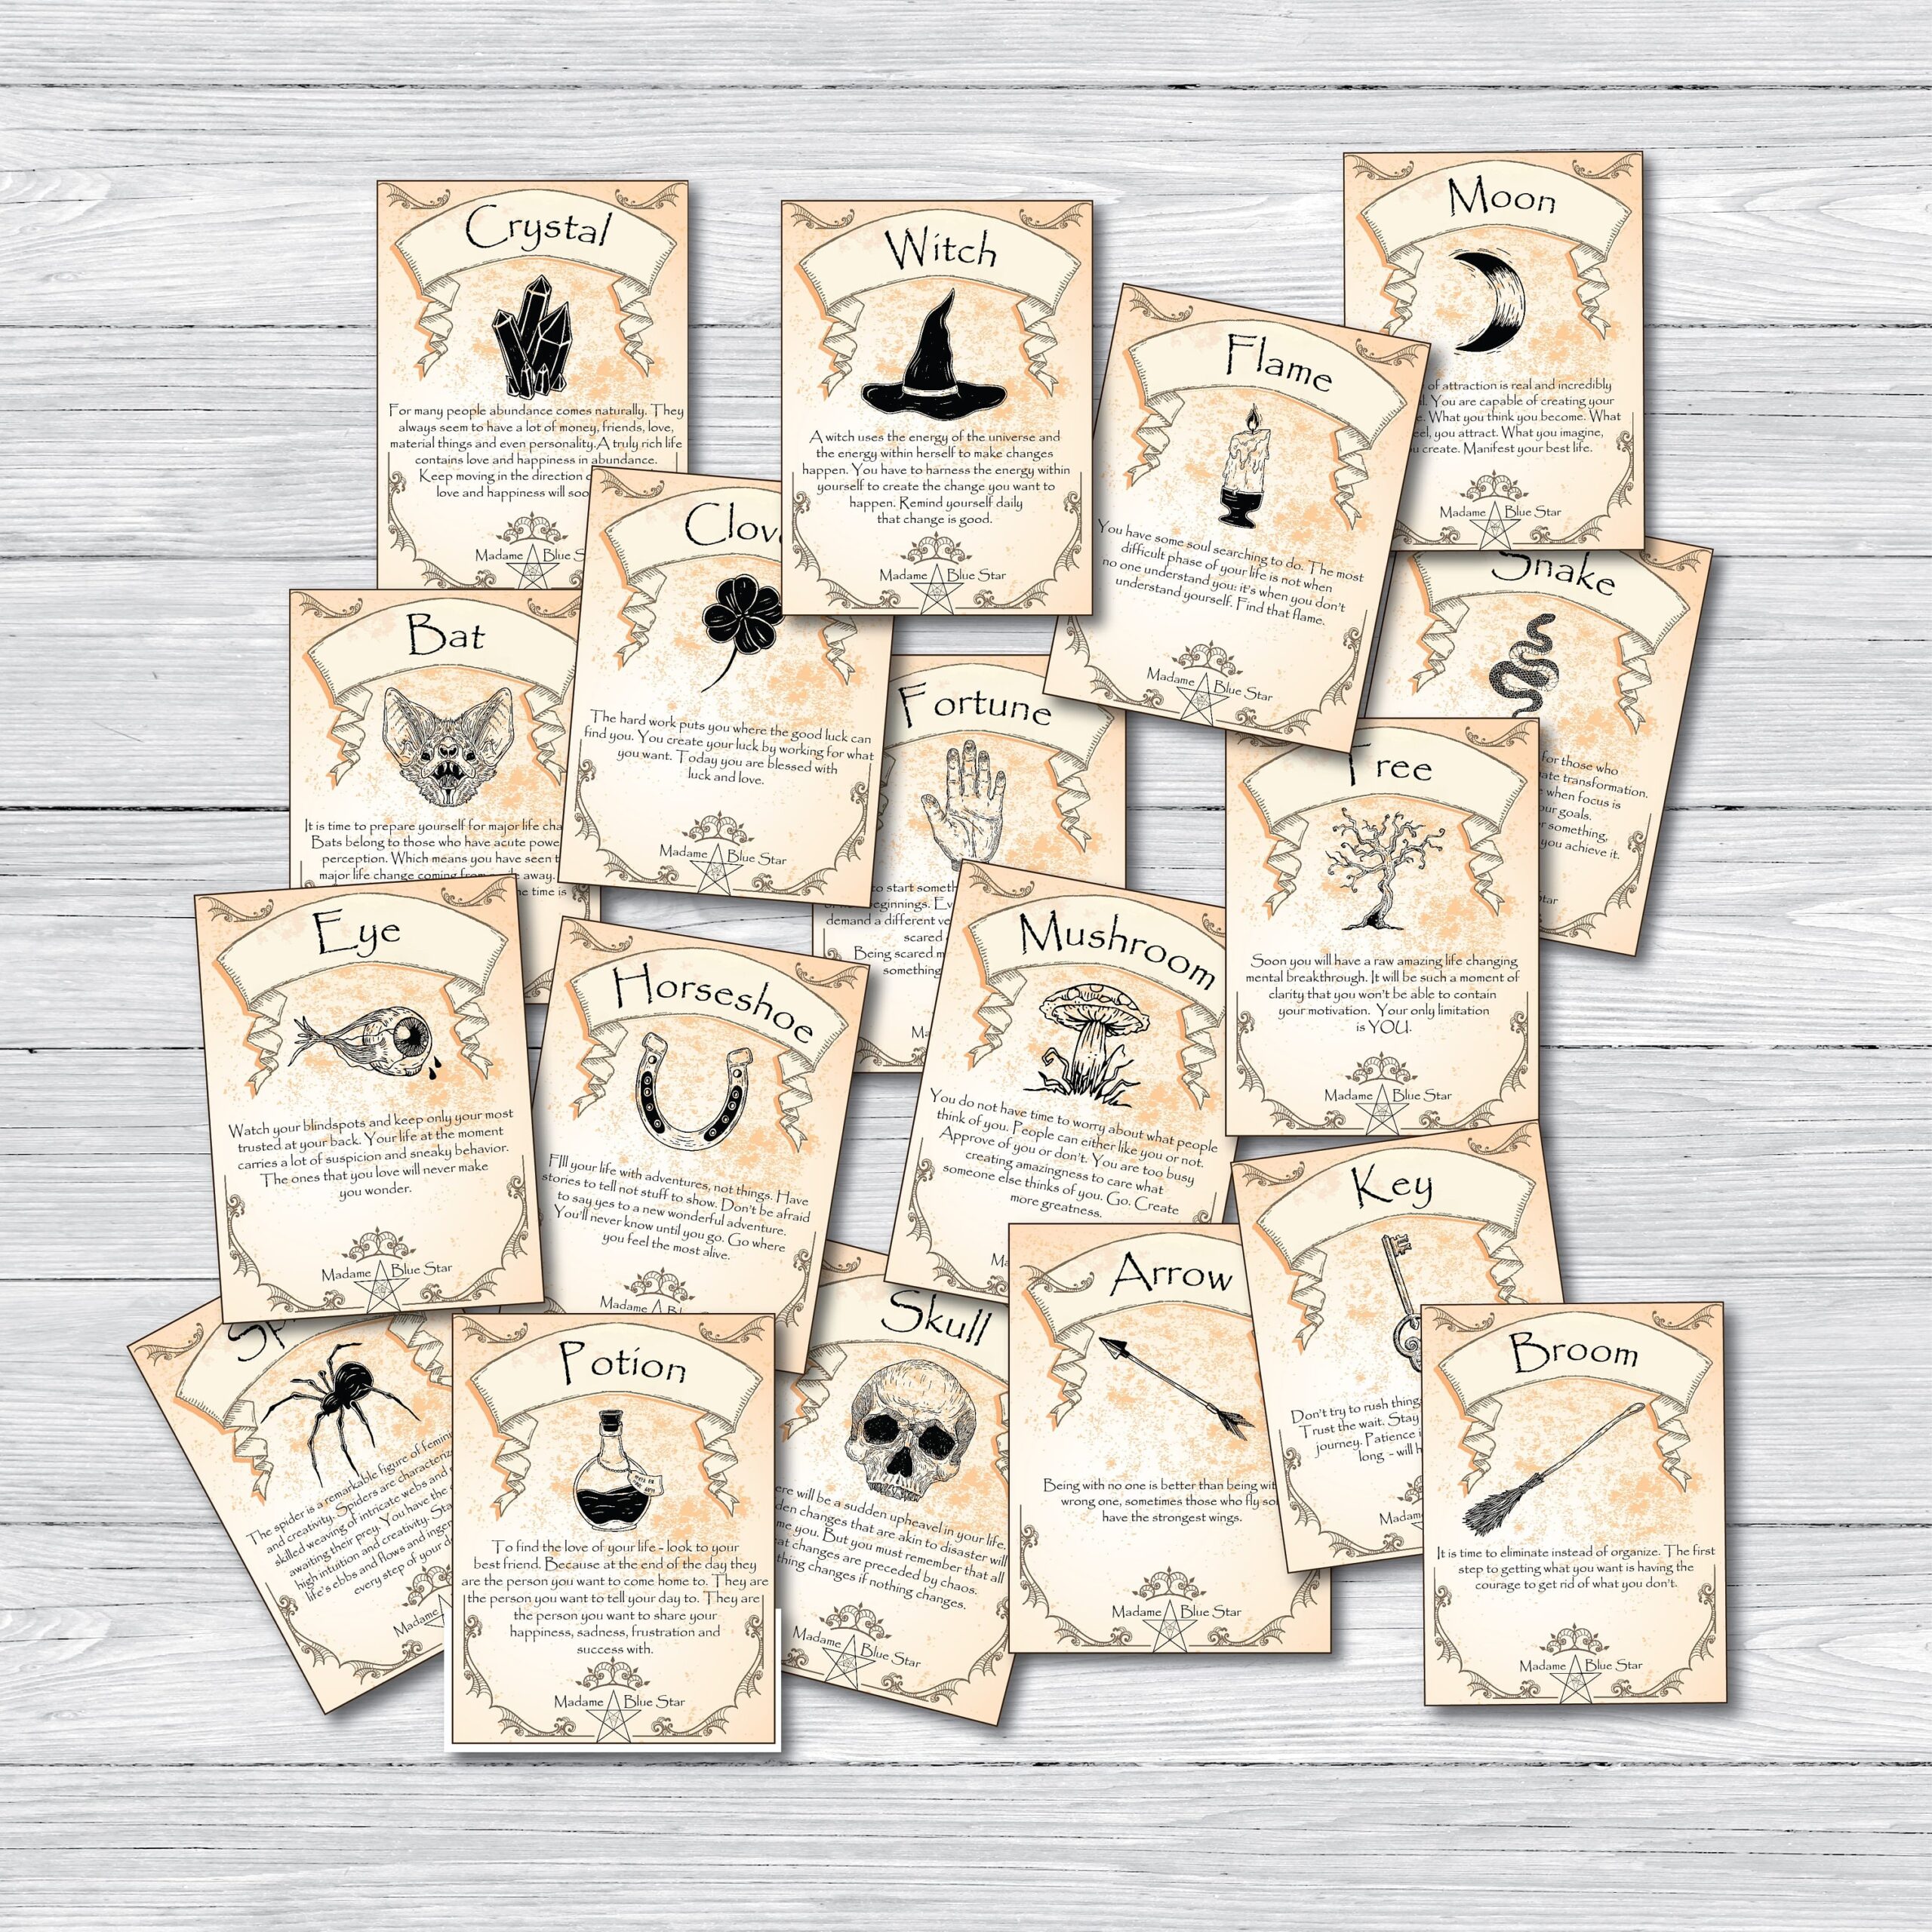 Printable Tarot Cards Printable Oracle Cards Halloween Tarot Cards Halloween Oracle Cards Novelty Tarot Cards Fortune Teller Cards Etsy